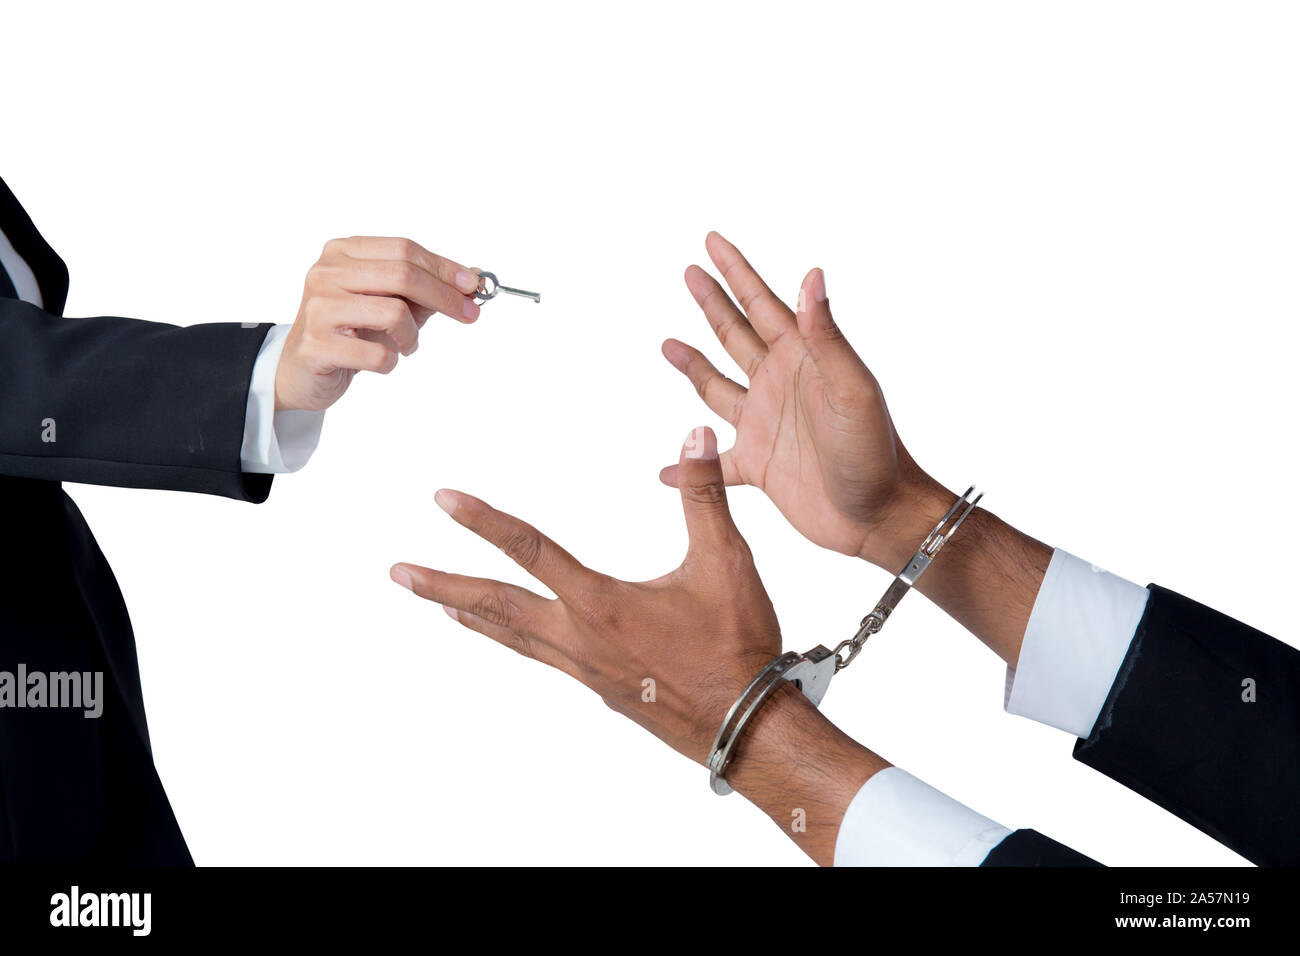 businessman in handcuffs and woman hand offering key solving business ideas concept isolated on white background Stock Photo